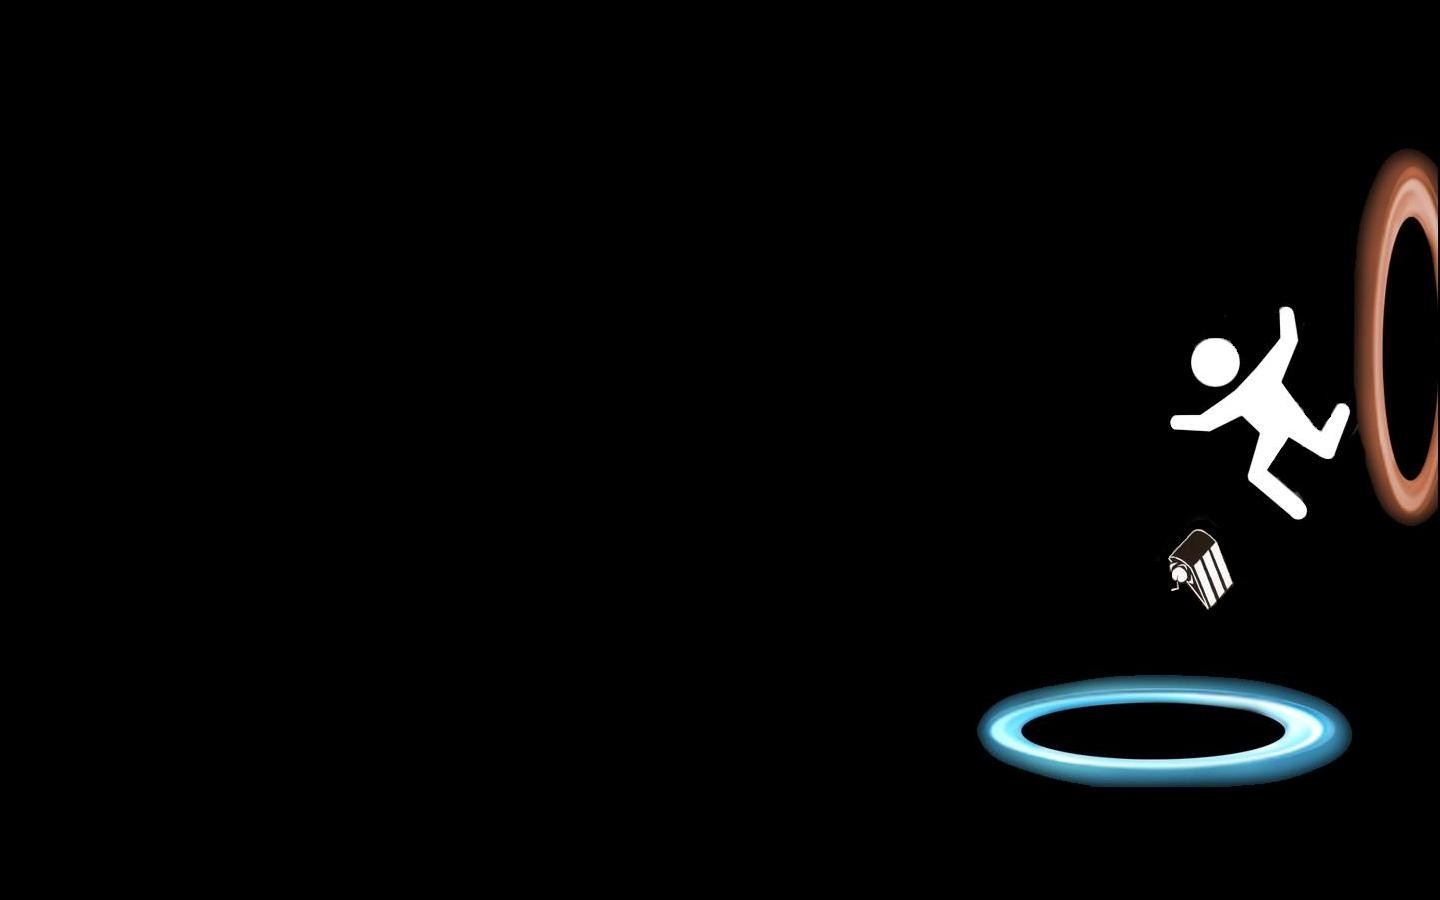 Portal Game Piece Of Cake Video Game Art Cake Simple Background Video Games 1440x900